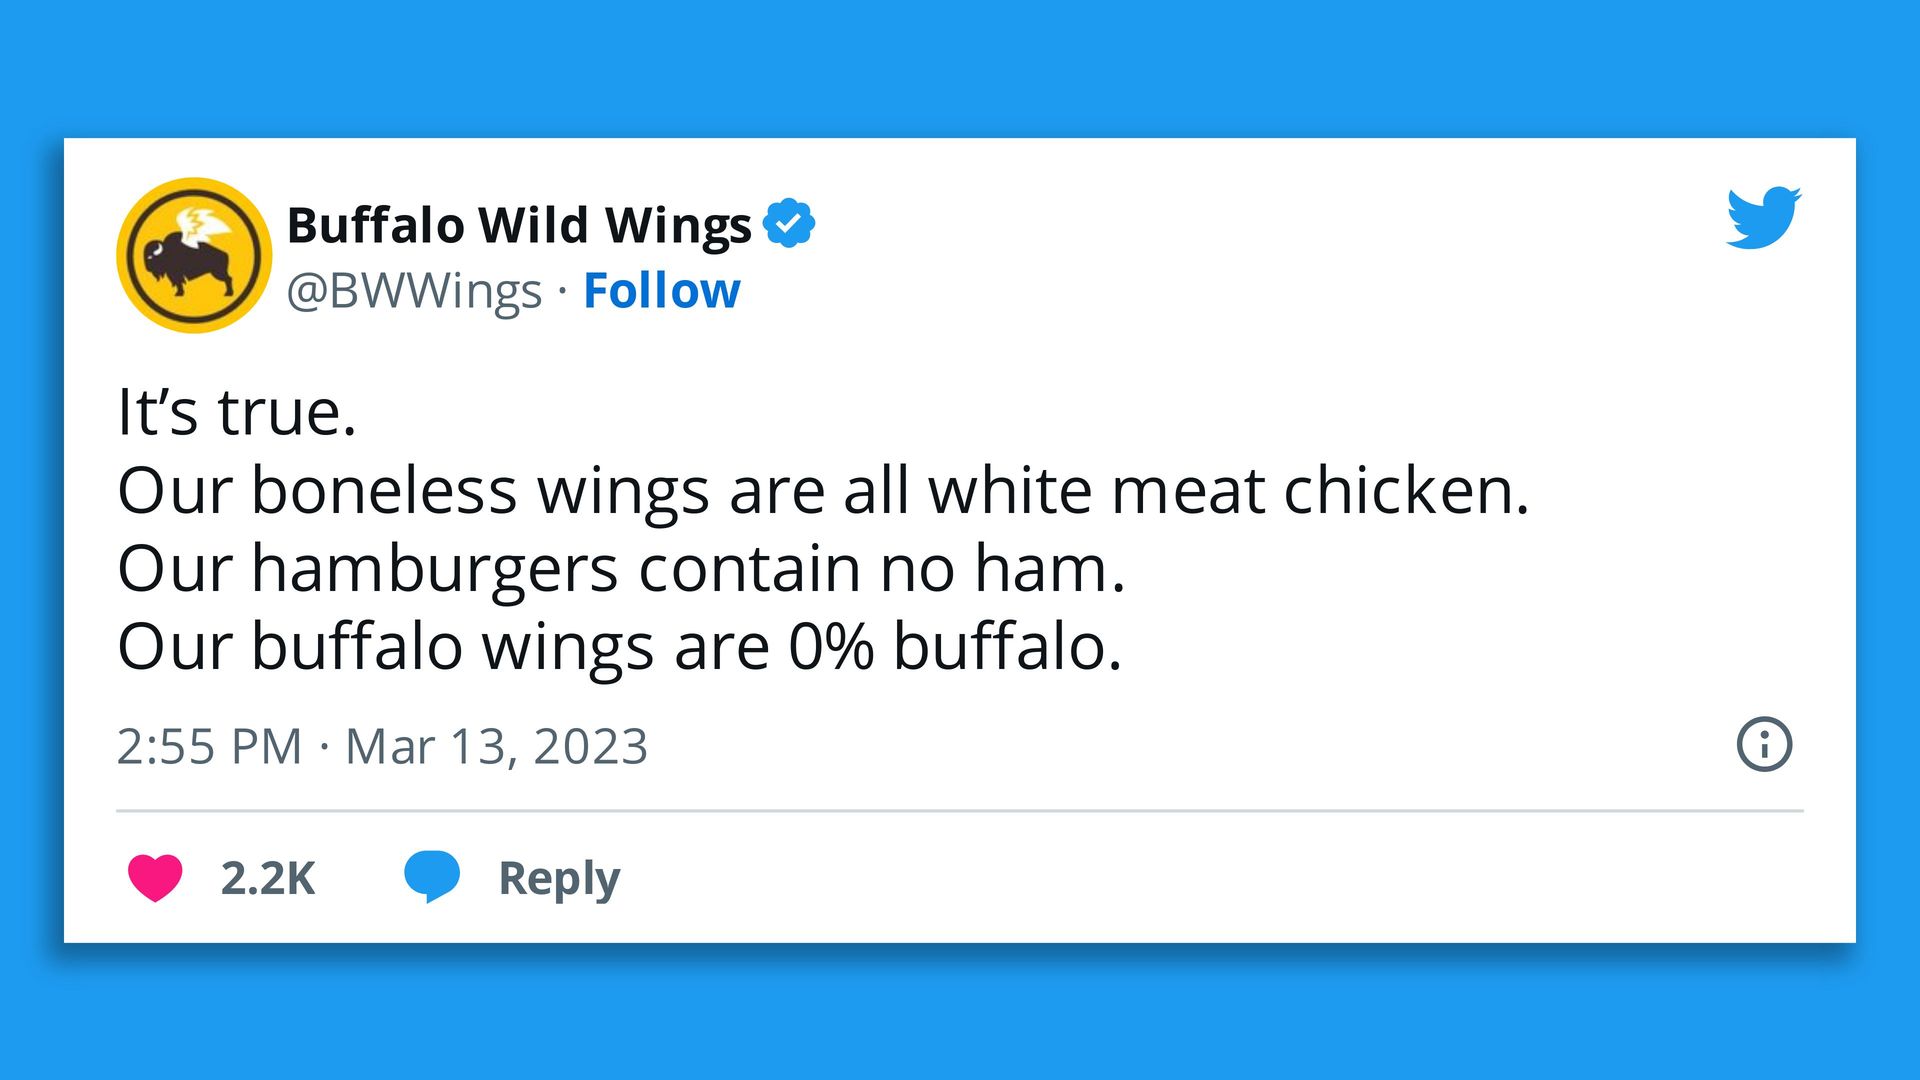 A tweet from Buffalo Wild Wings saying "it's true" that its boneless wings are all white meat chicken, but also that hamburgers contain no ham and buffalo wings don't contain buffalo